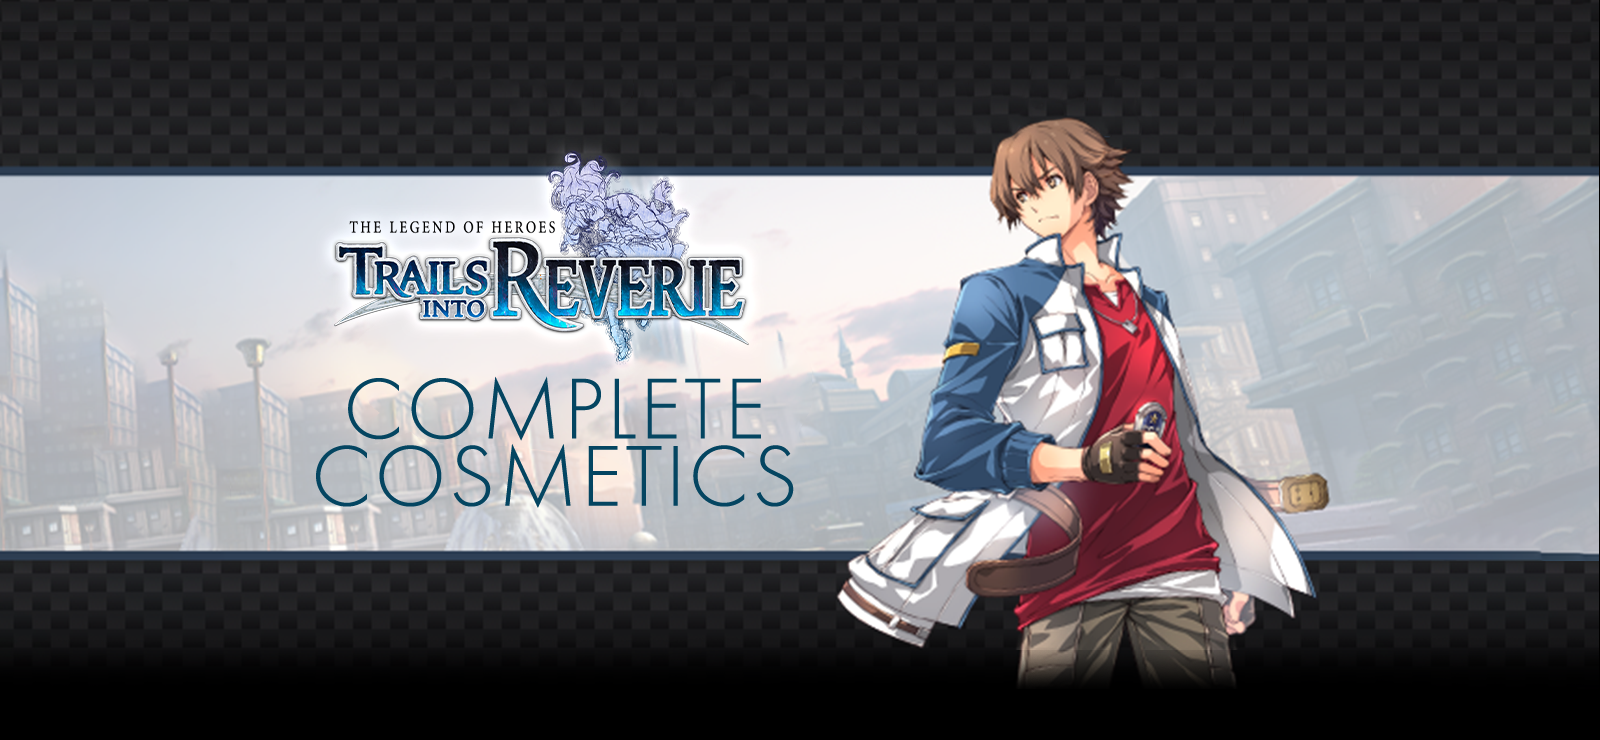 The Legend Of Heroes: Trails Into Reverie - Complete Cosmetics